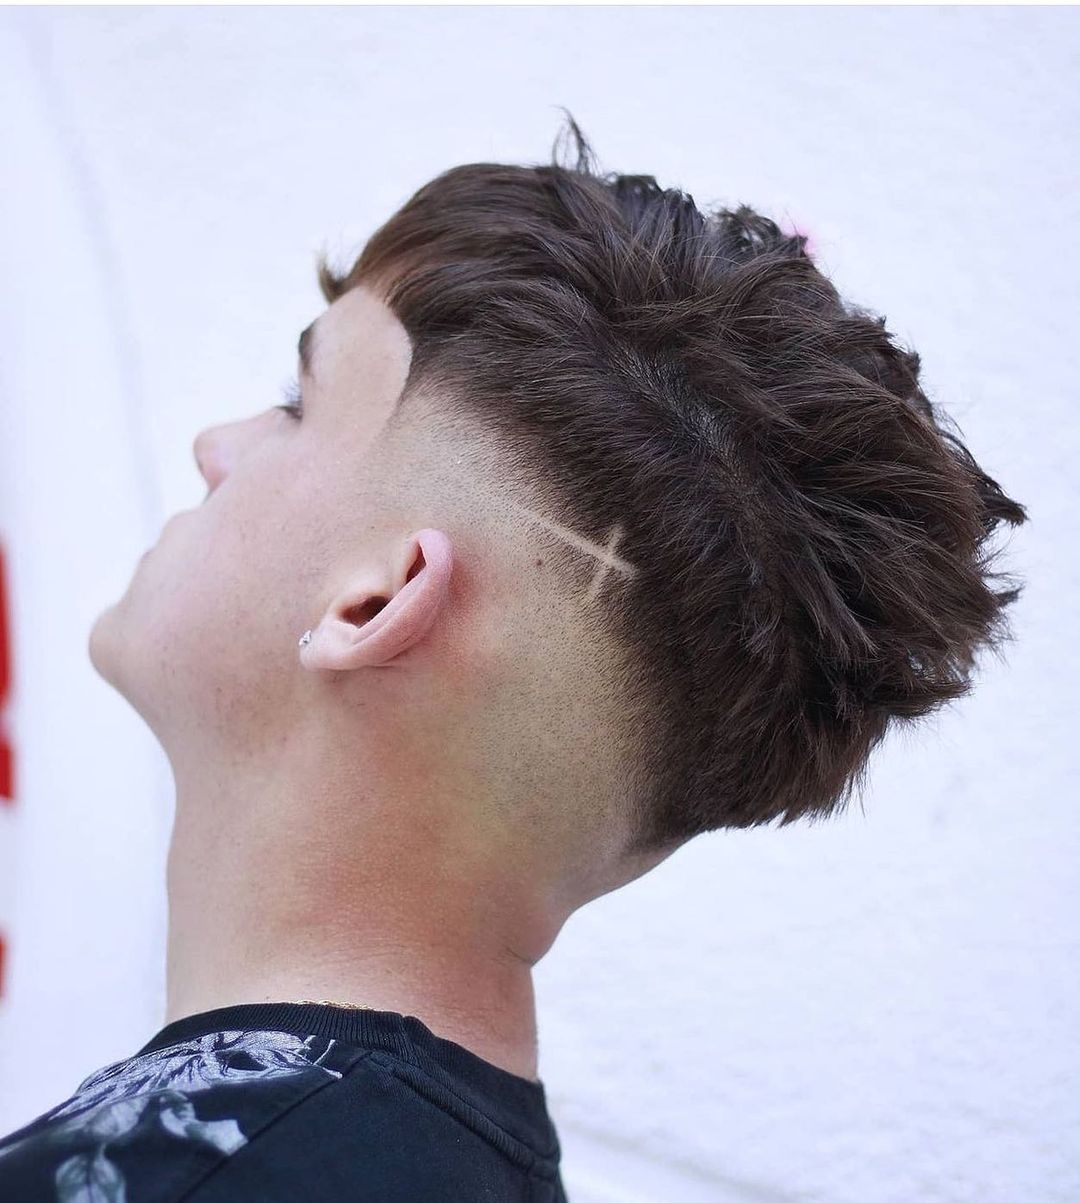  Men's Fade Haircuts for Short Hair - Cool Men's Hairstyles 2021